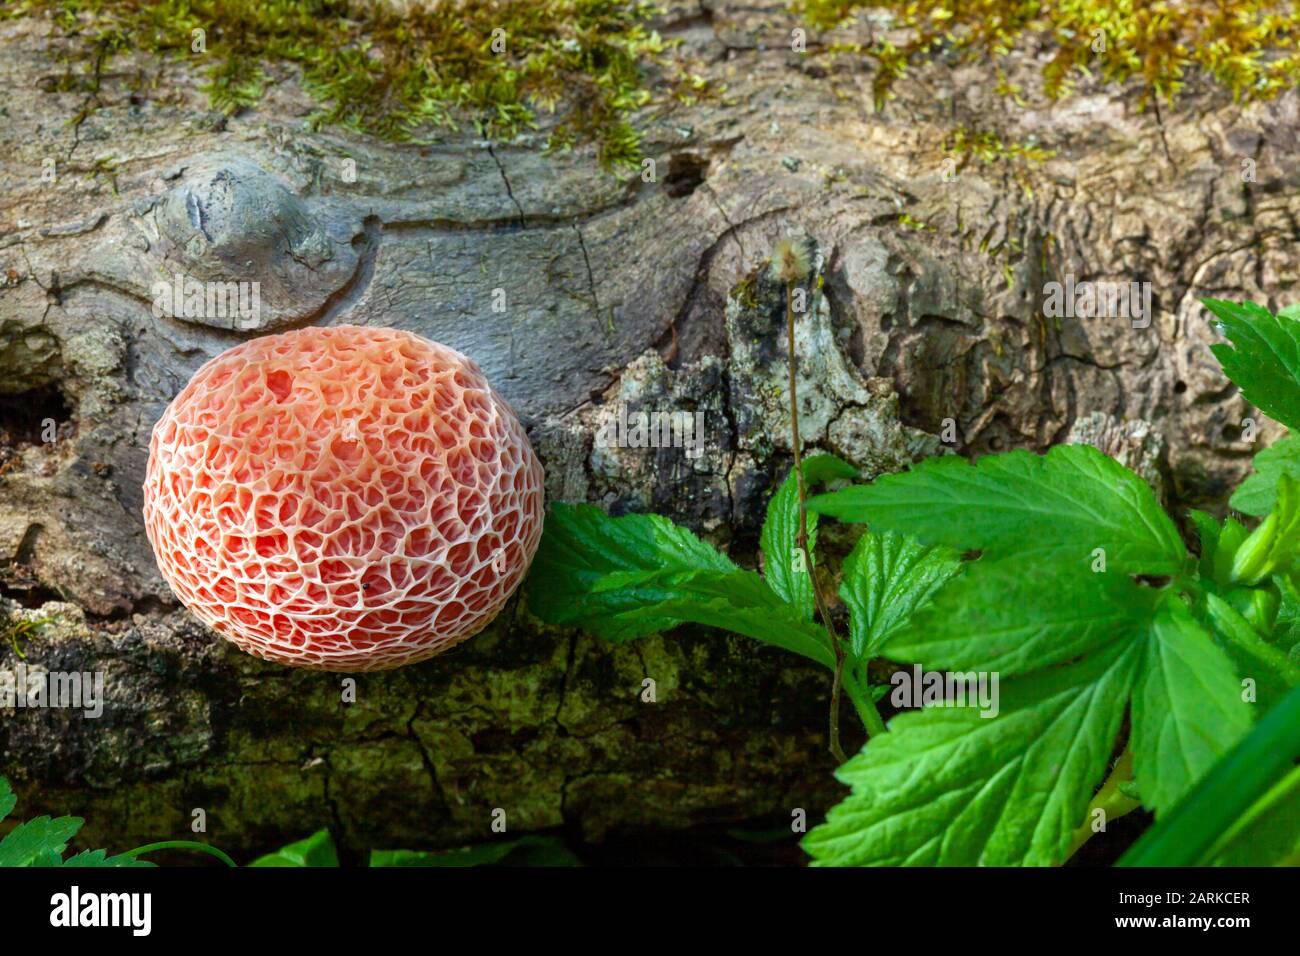 Netted Rhodotus Mushroom (Rhodotus palmatus), growing out of log in forest, Stock Photo